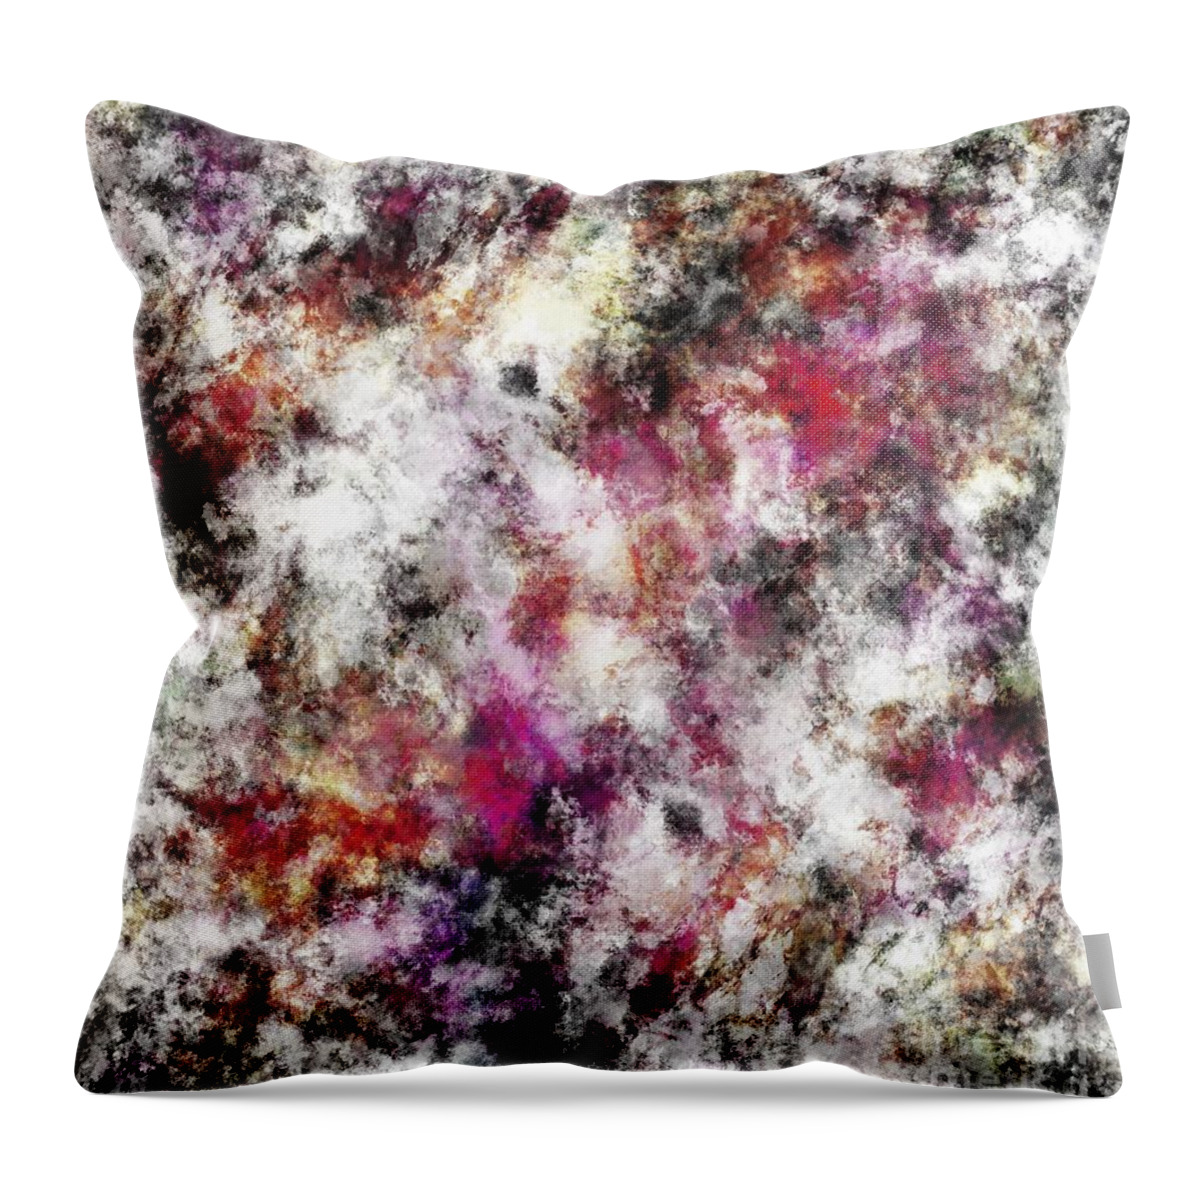 Transparent Throw Pillow featuring the digital art Rescue by Keith Mills